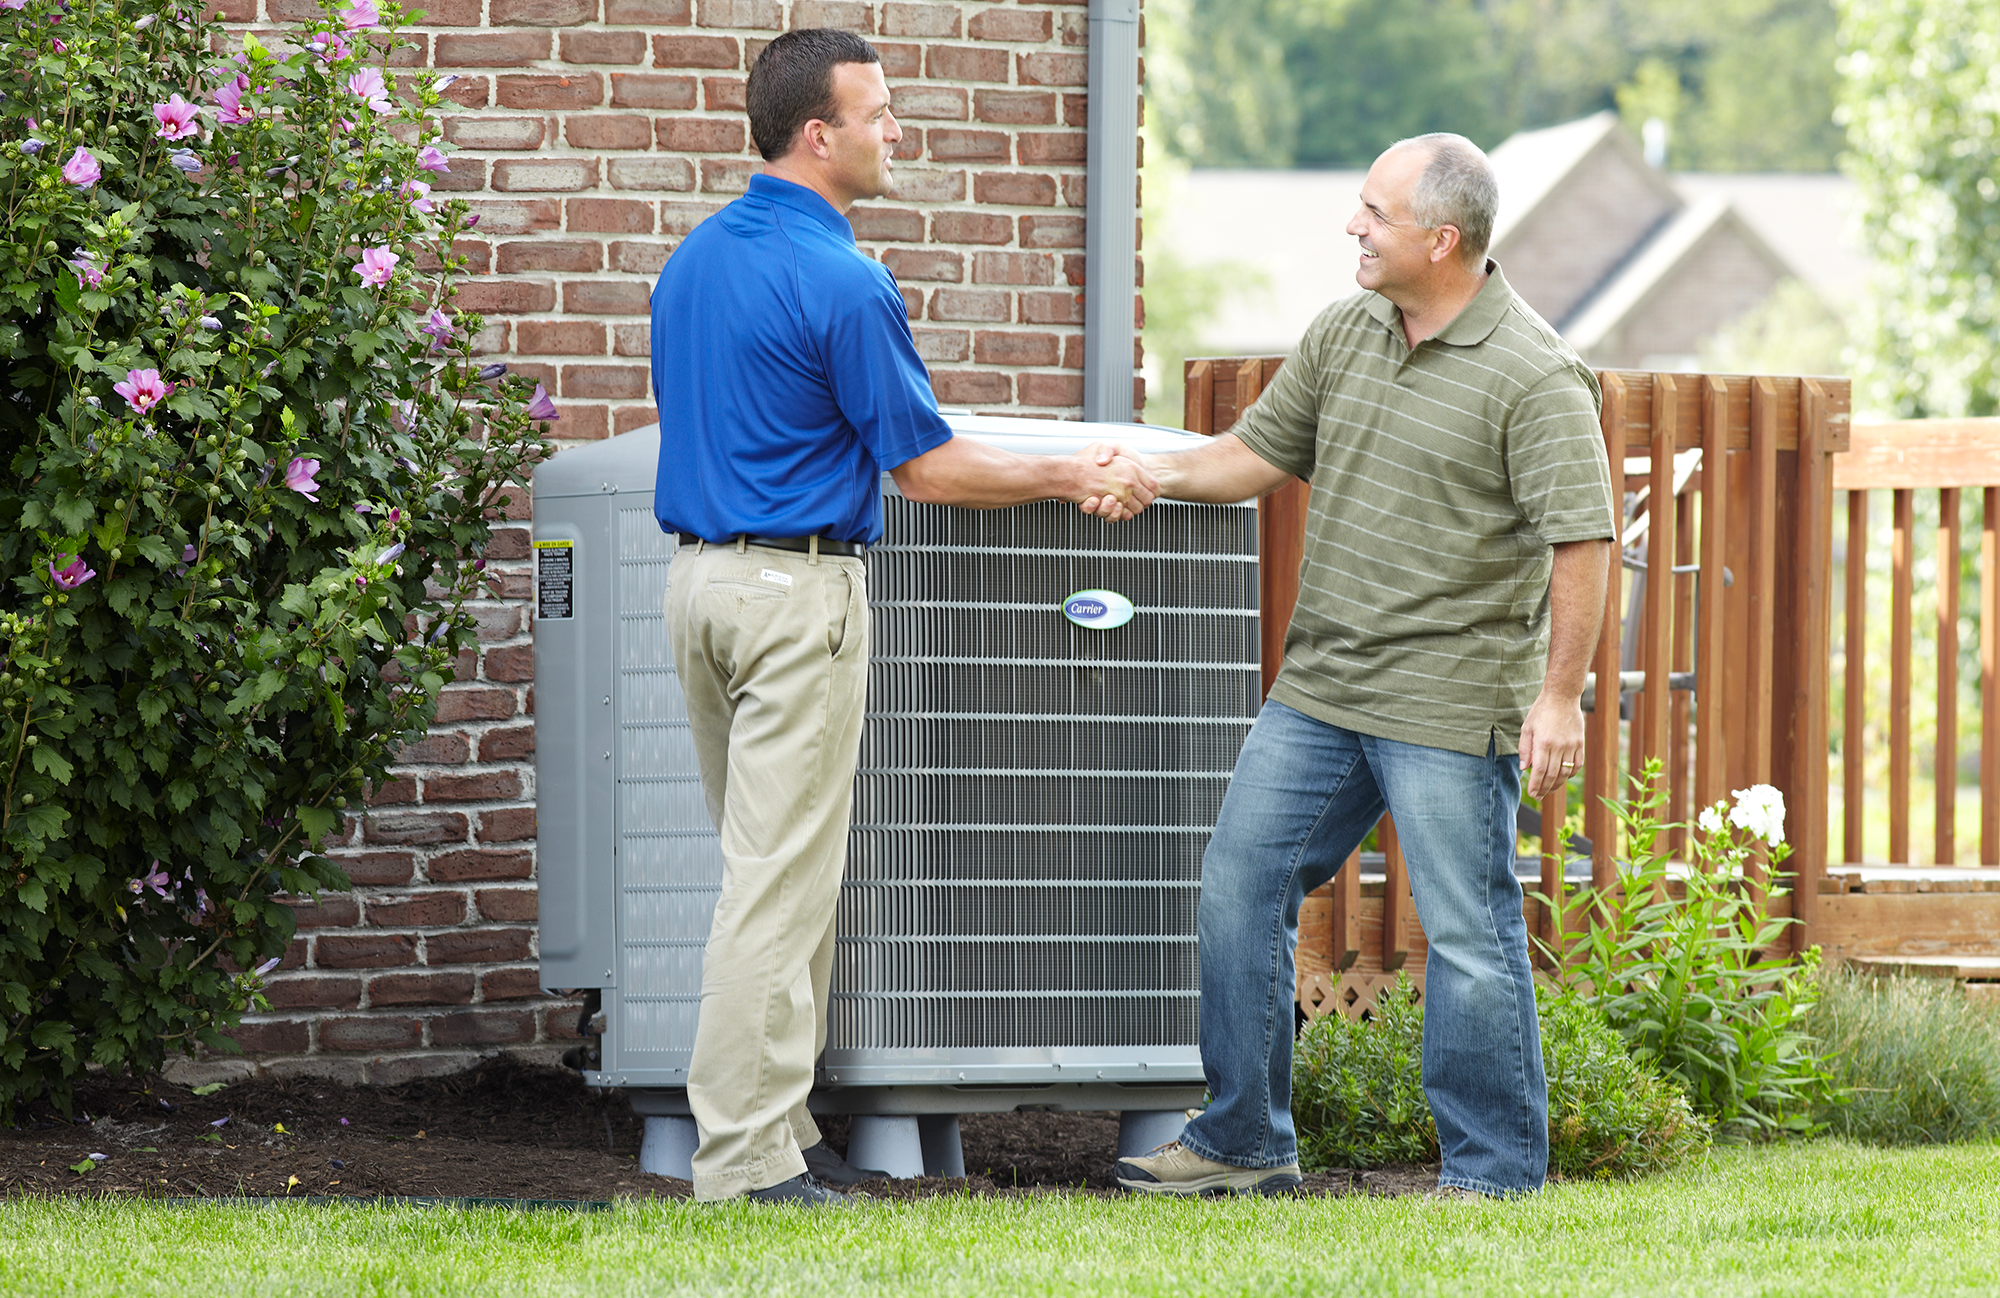 Carrier HVAC tech with customer outdoors